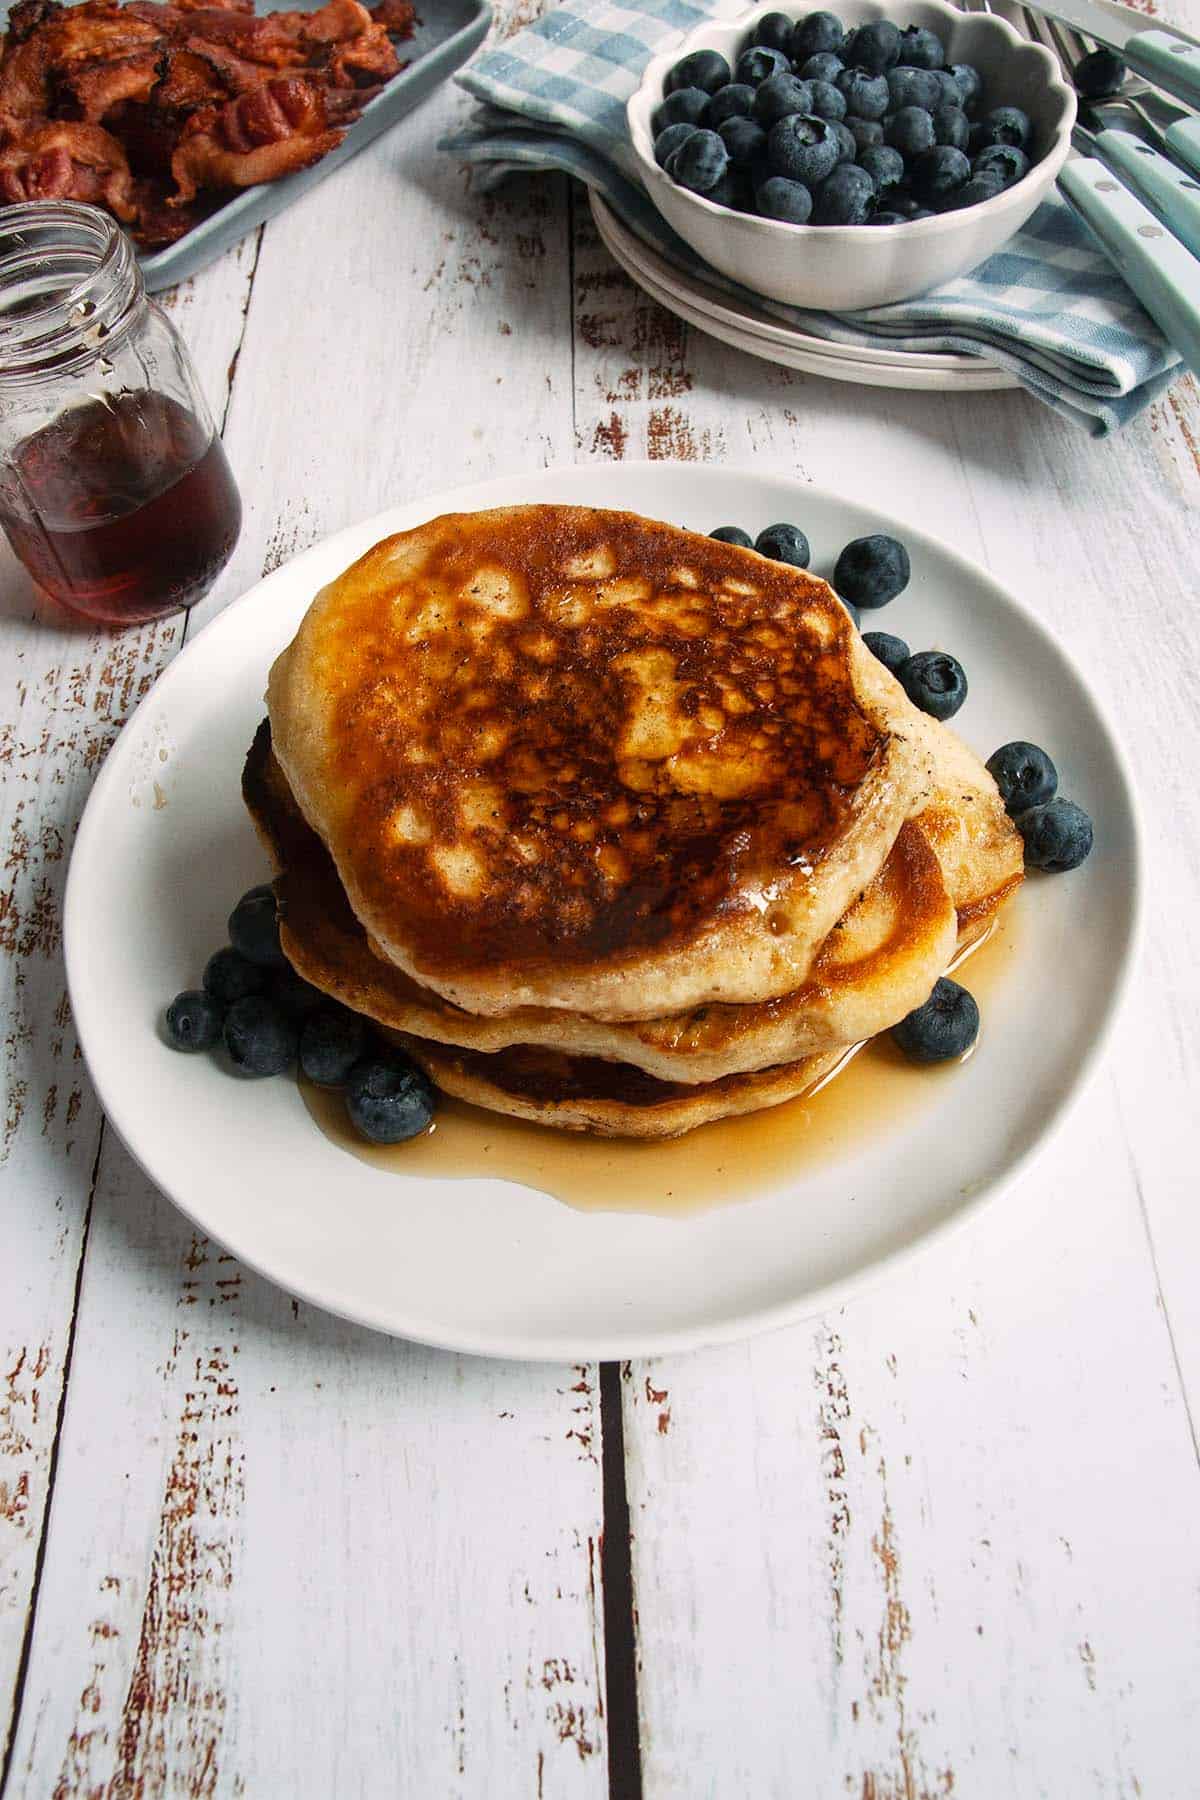 A stack of pancakes, maple syrup, and blueberries on a plate with blueberries and bacon in the background.